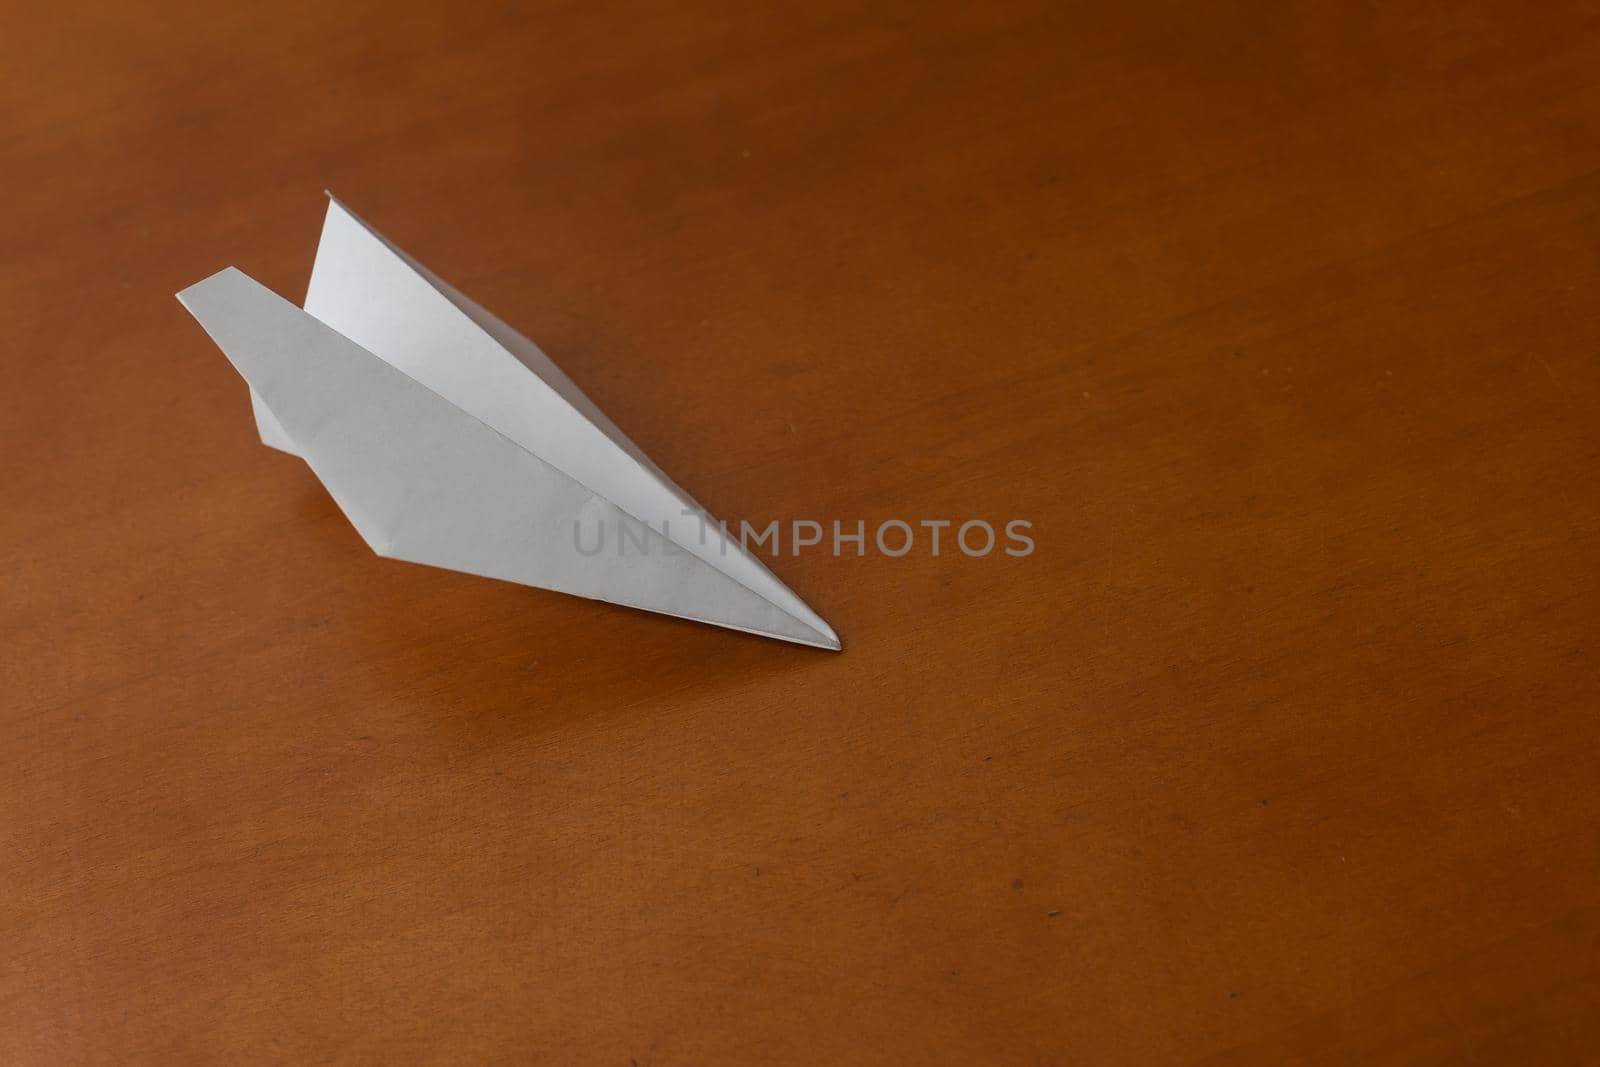 Flat lay of white paper plane on pastel brown background